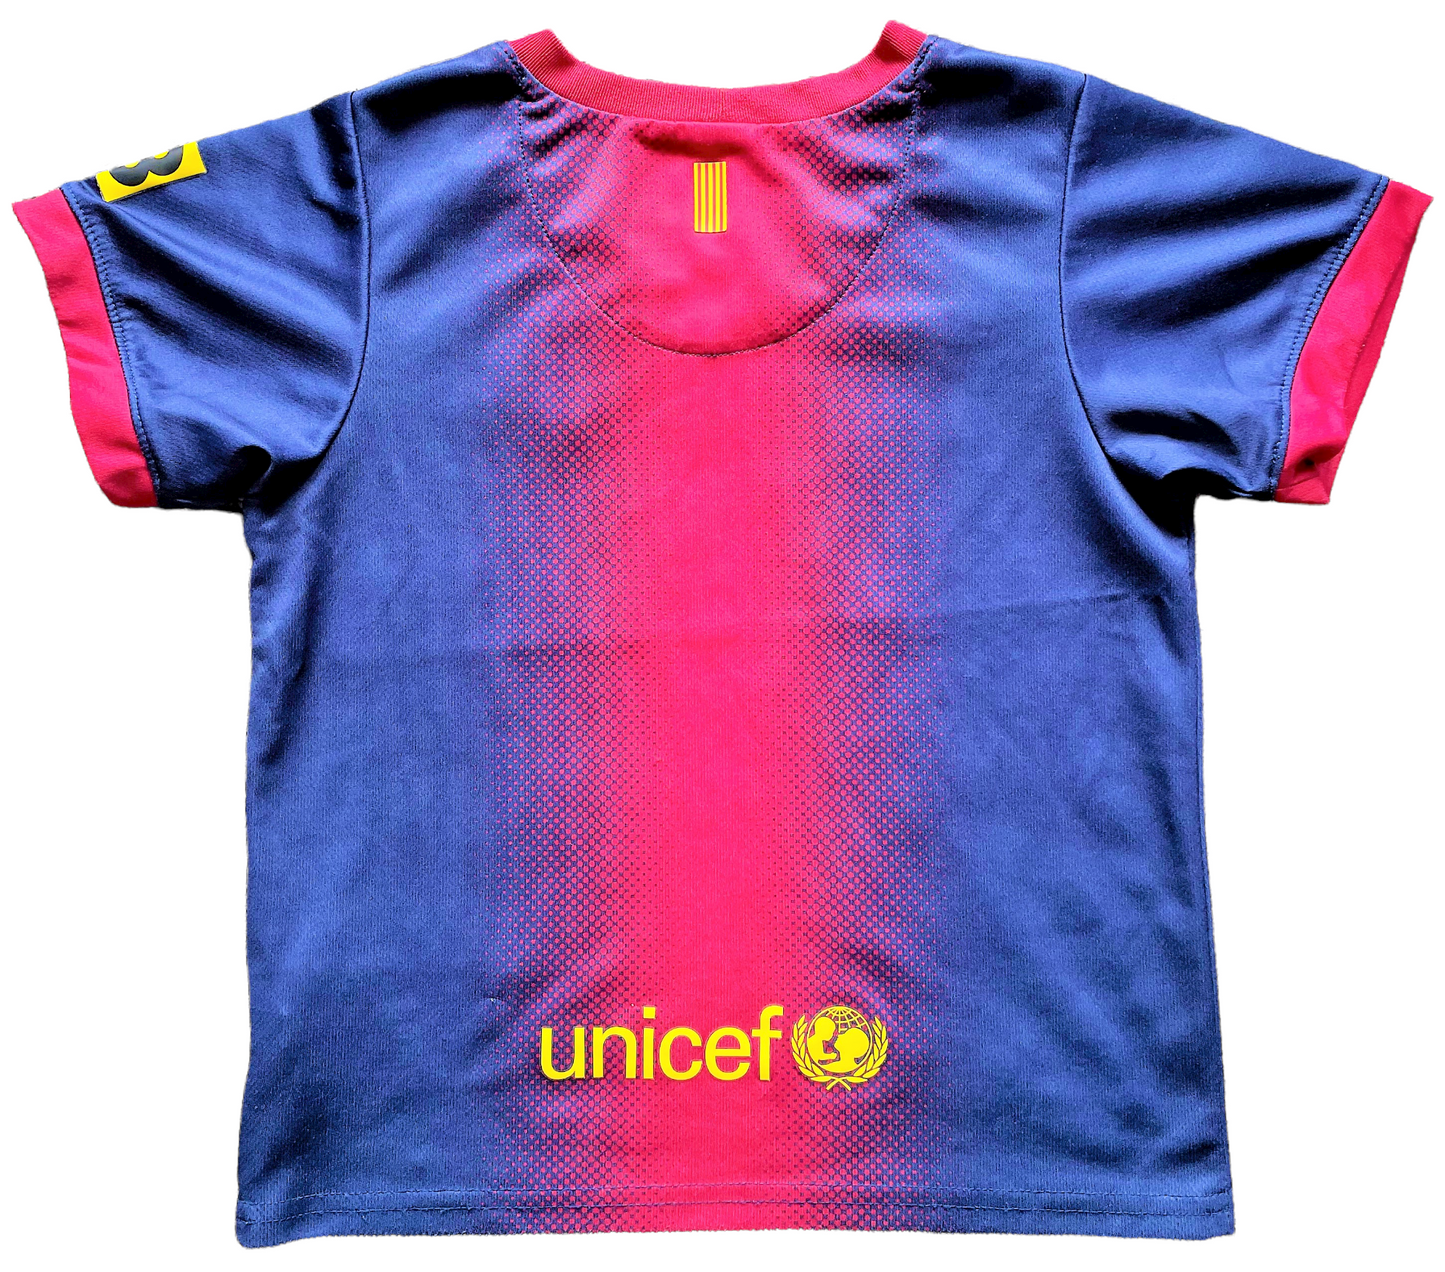 Barcelona Home Shirt 2012 (very good) Child XSmall Aged 4 to 6? Height 14 inches